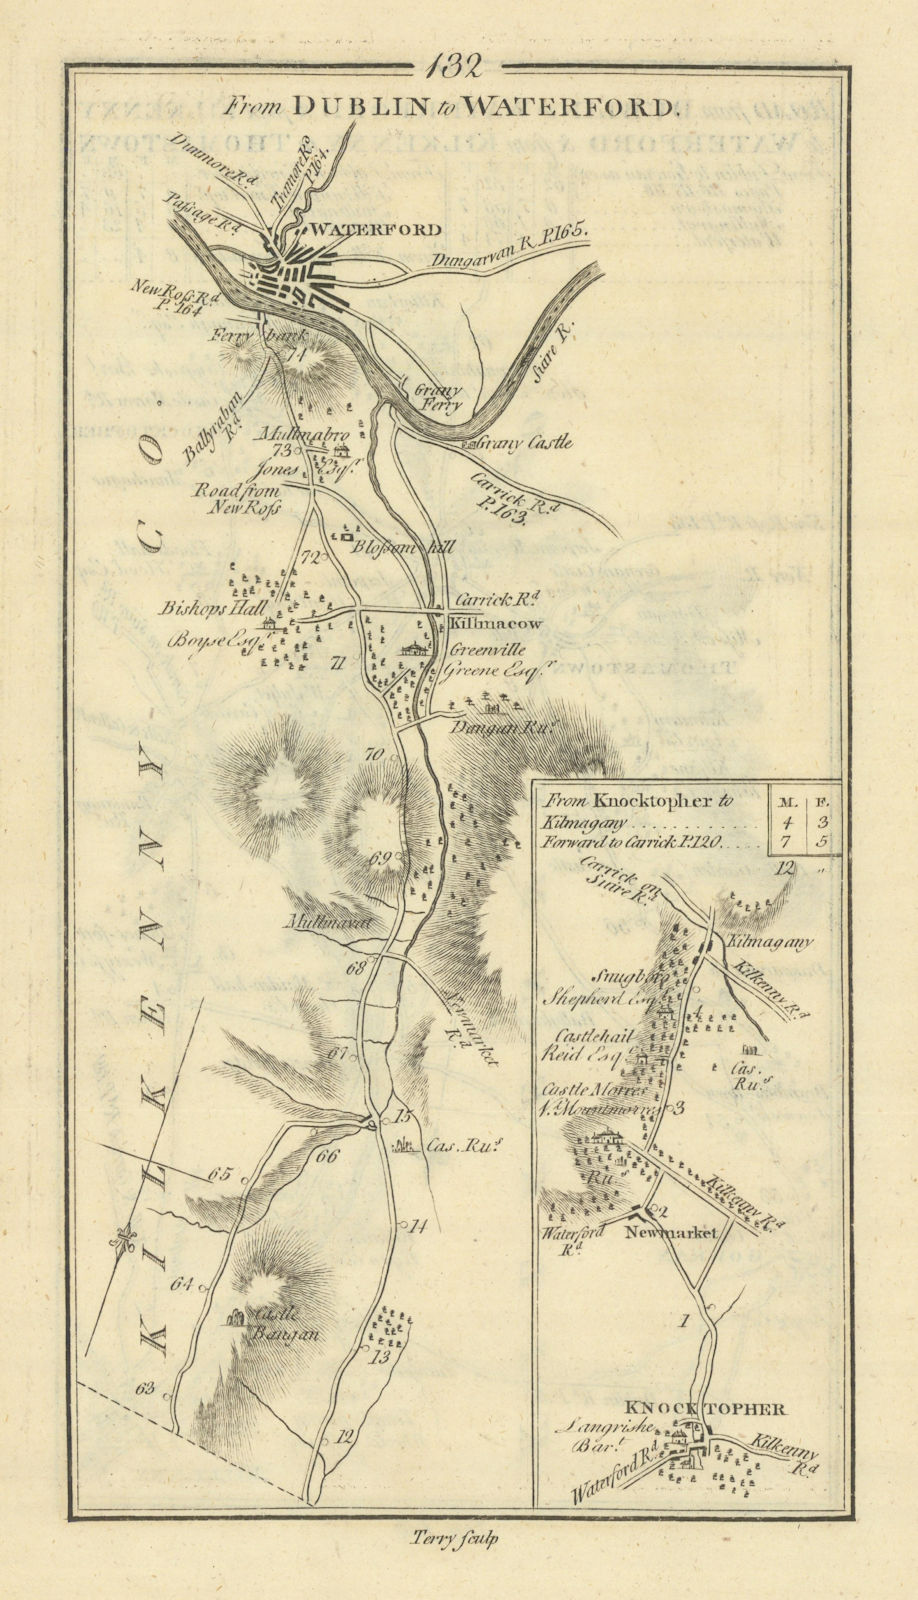 #132 Dublin to Waterford. Kilmacow Newmarket Knocktopher TAYLOR/SKINNER 1778 map